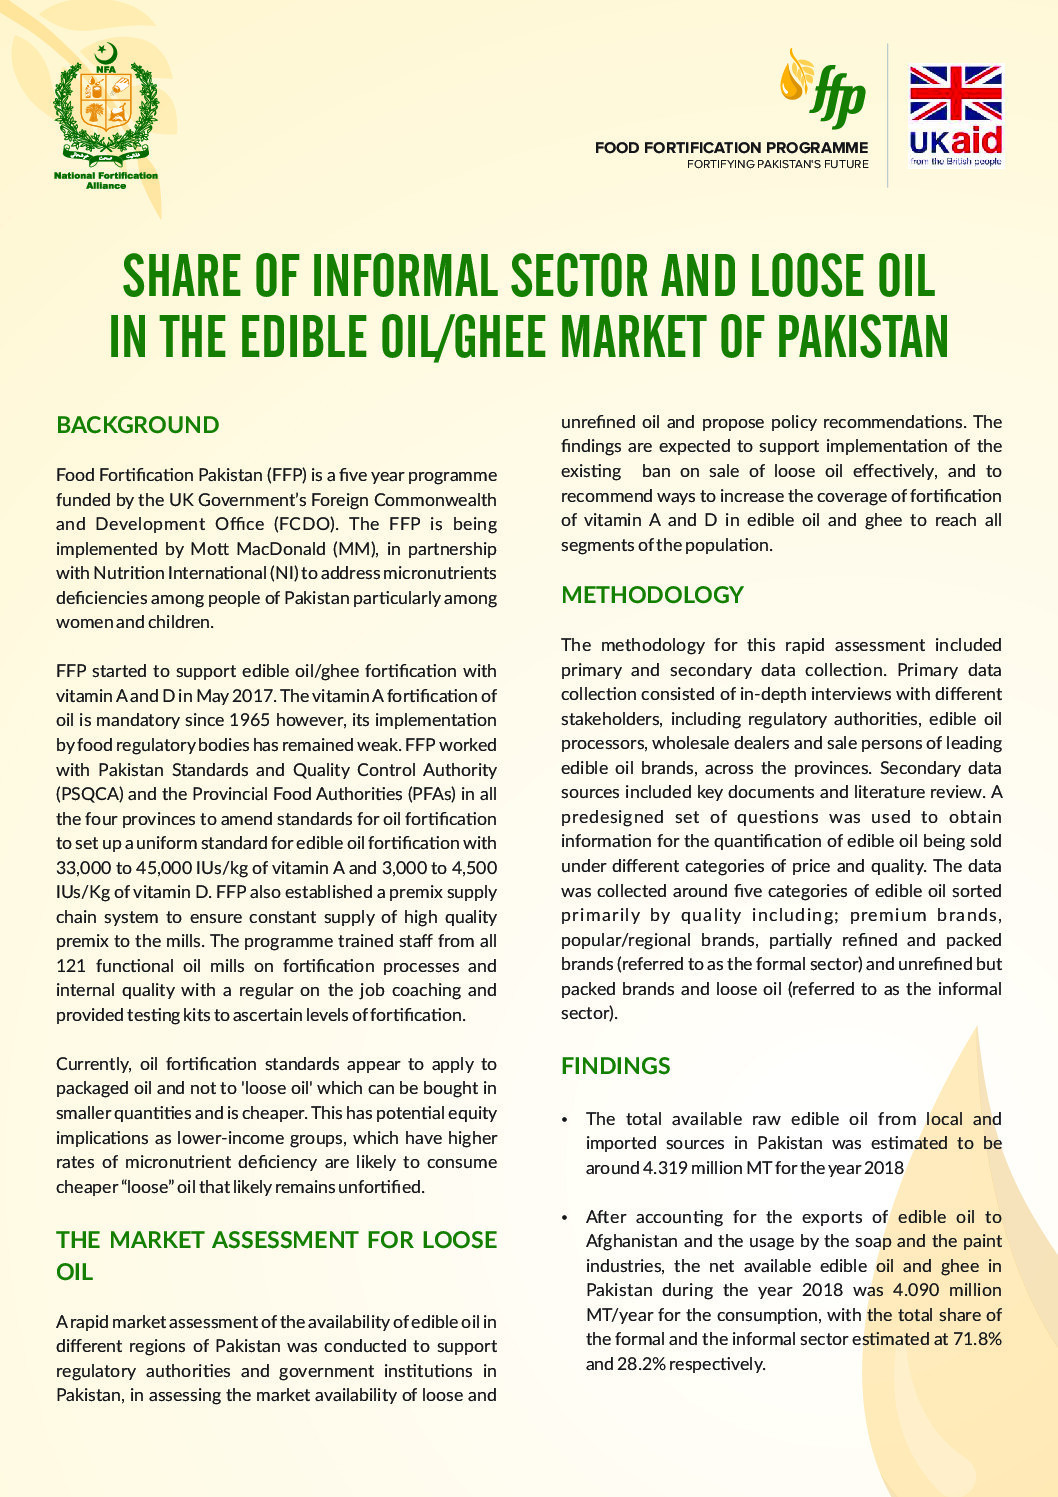 Share of Informal Sector and Loose Oil in the Edible Oil/Ghee Market of Pakistan thumbnail